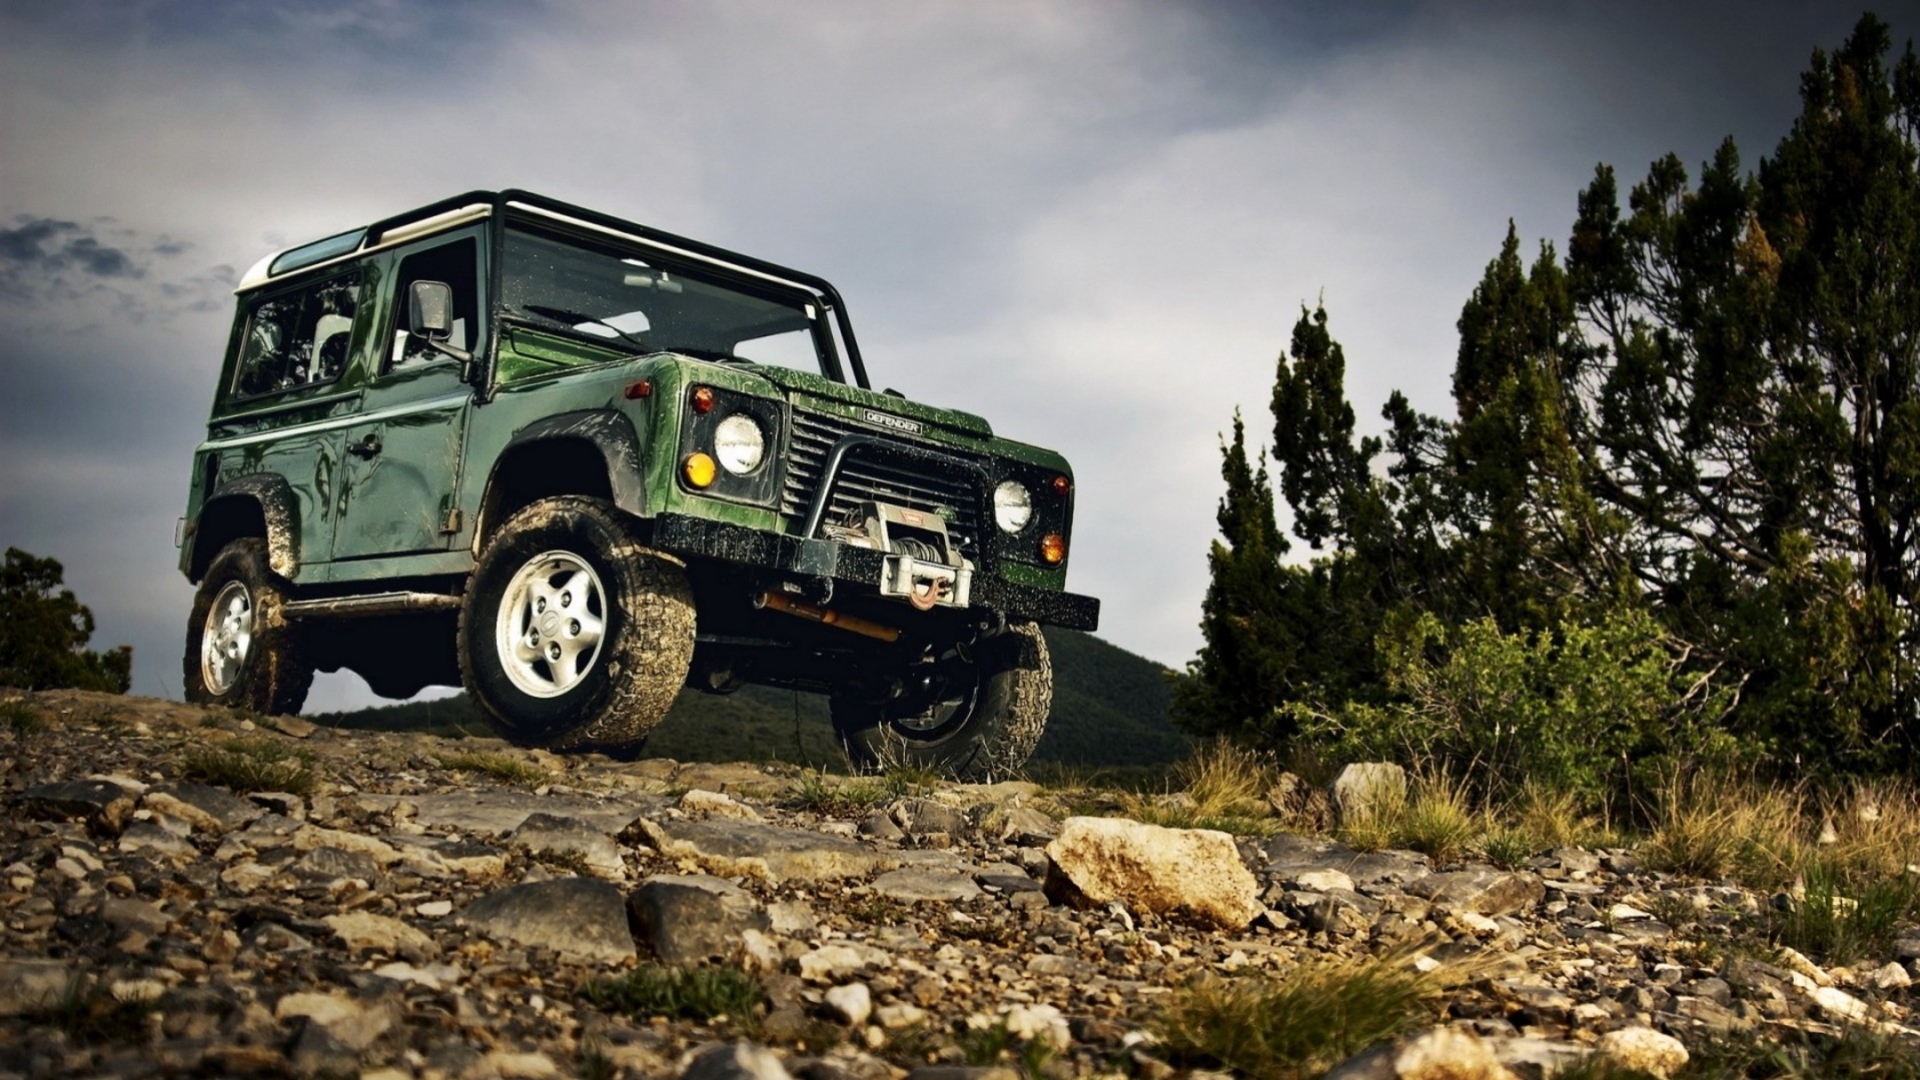 classic jeep hd wallpaper,land vehicle,vehicle,car,off roading,off road vehicle